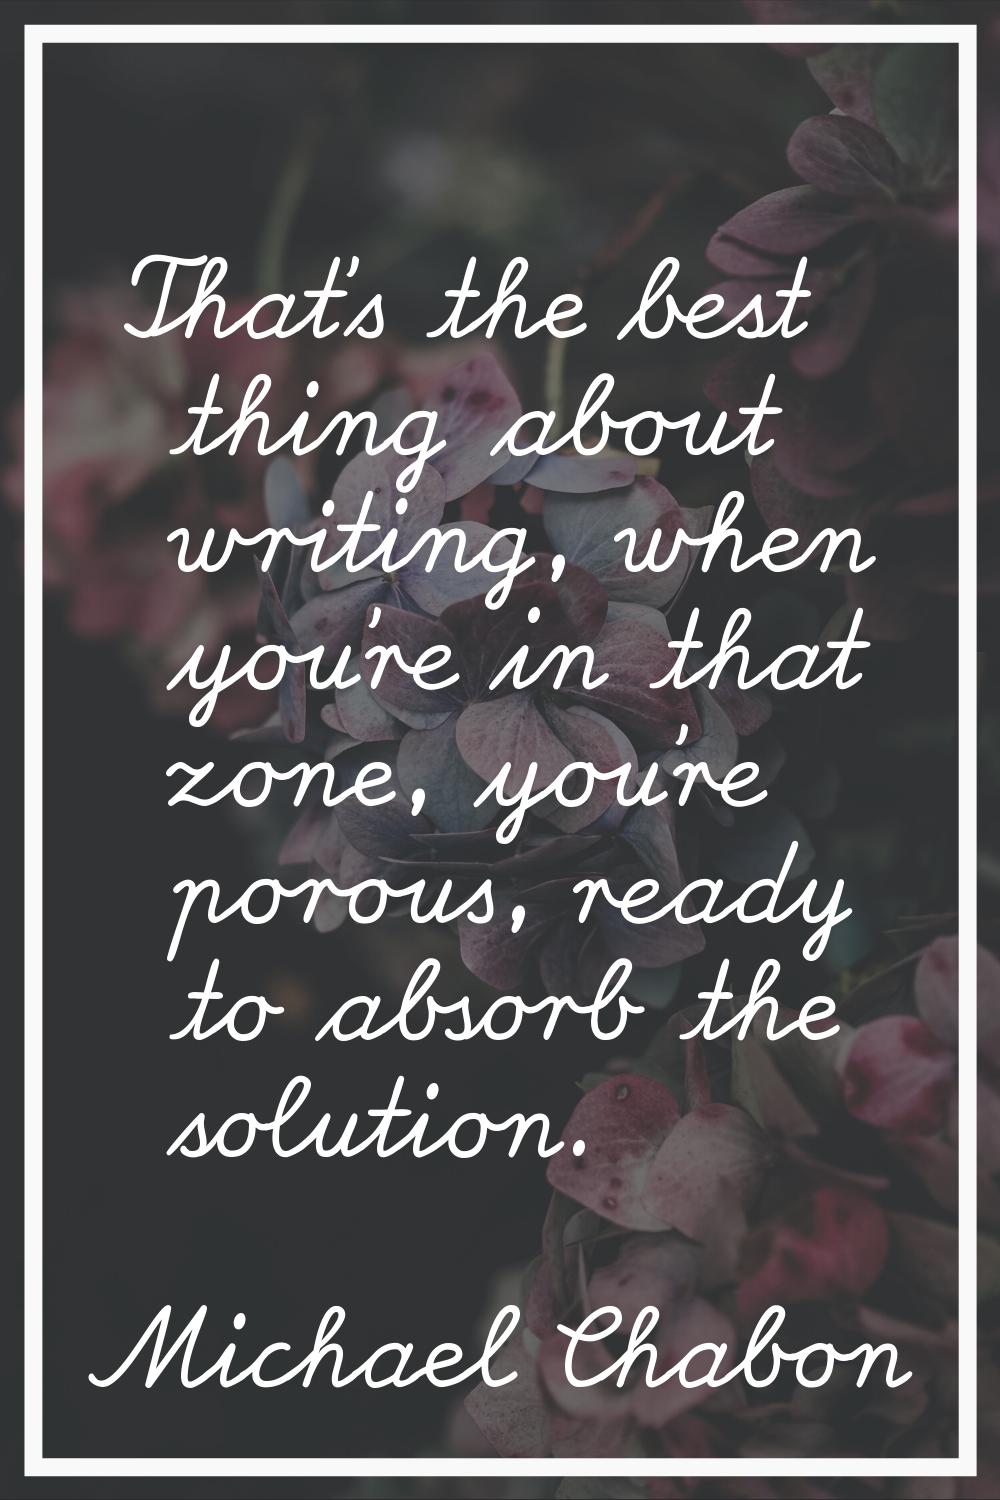 That's the best thing about writing, when you're in that zone, you're porous, ready to absorb the s